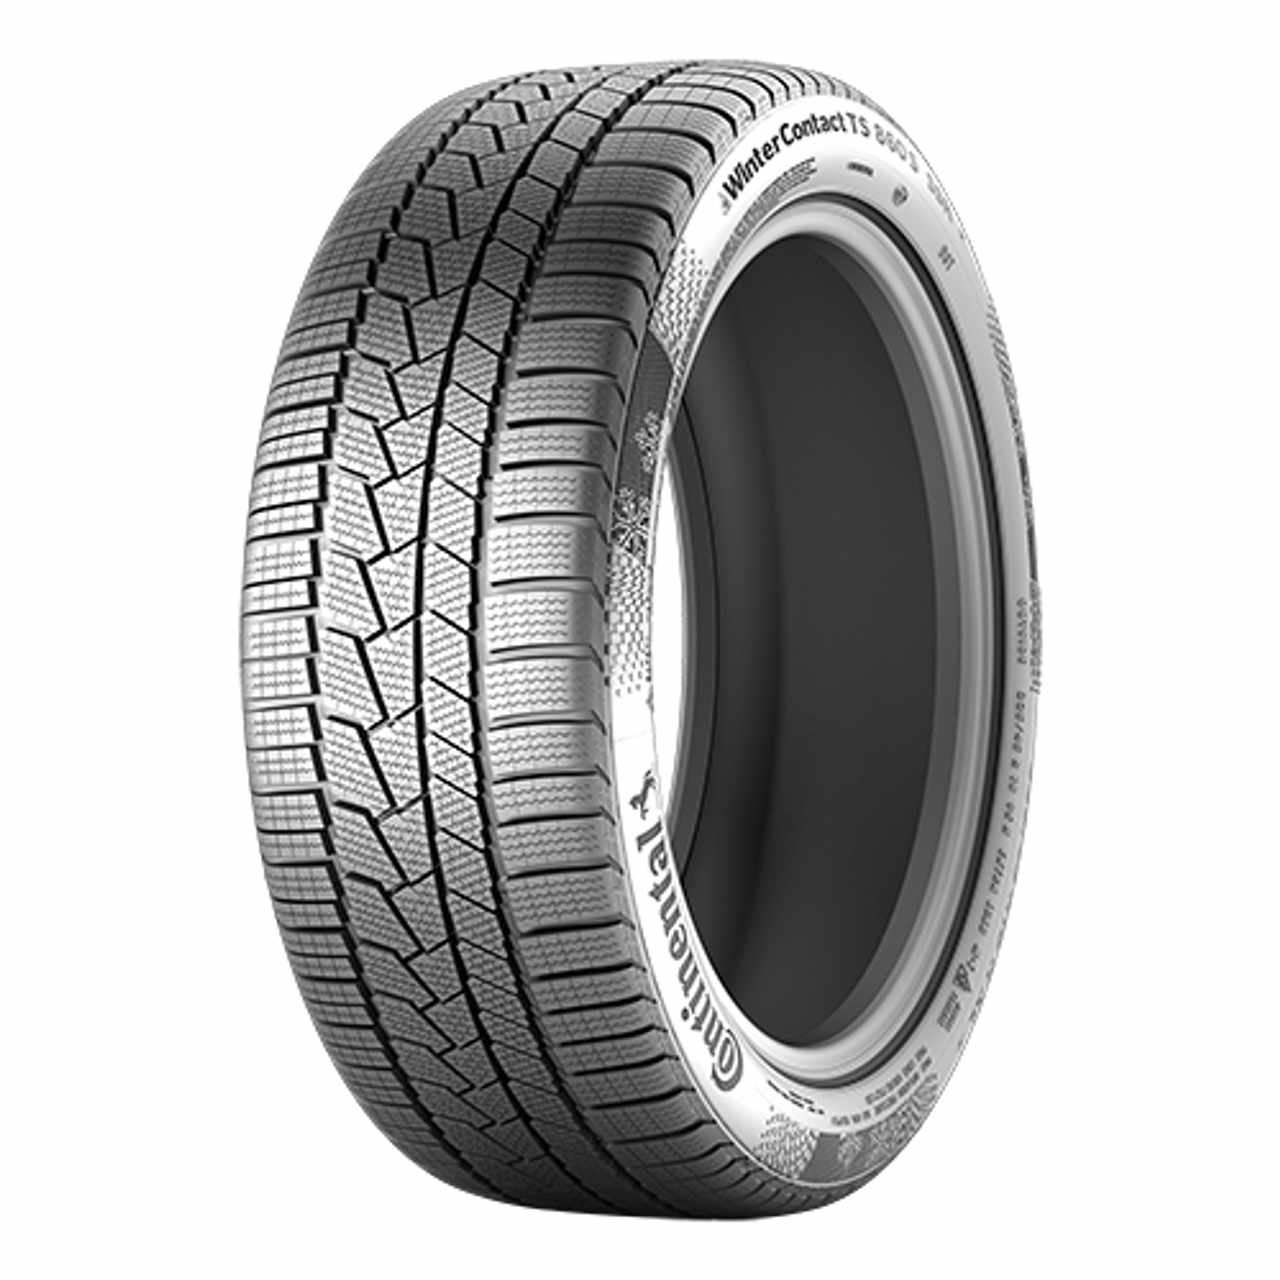 CONTINENTAL WINTERCONTACT TS 860 S (*) (EVc) 195/60R16 93H BSW XL